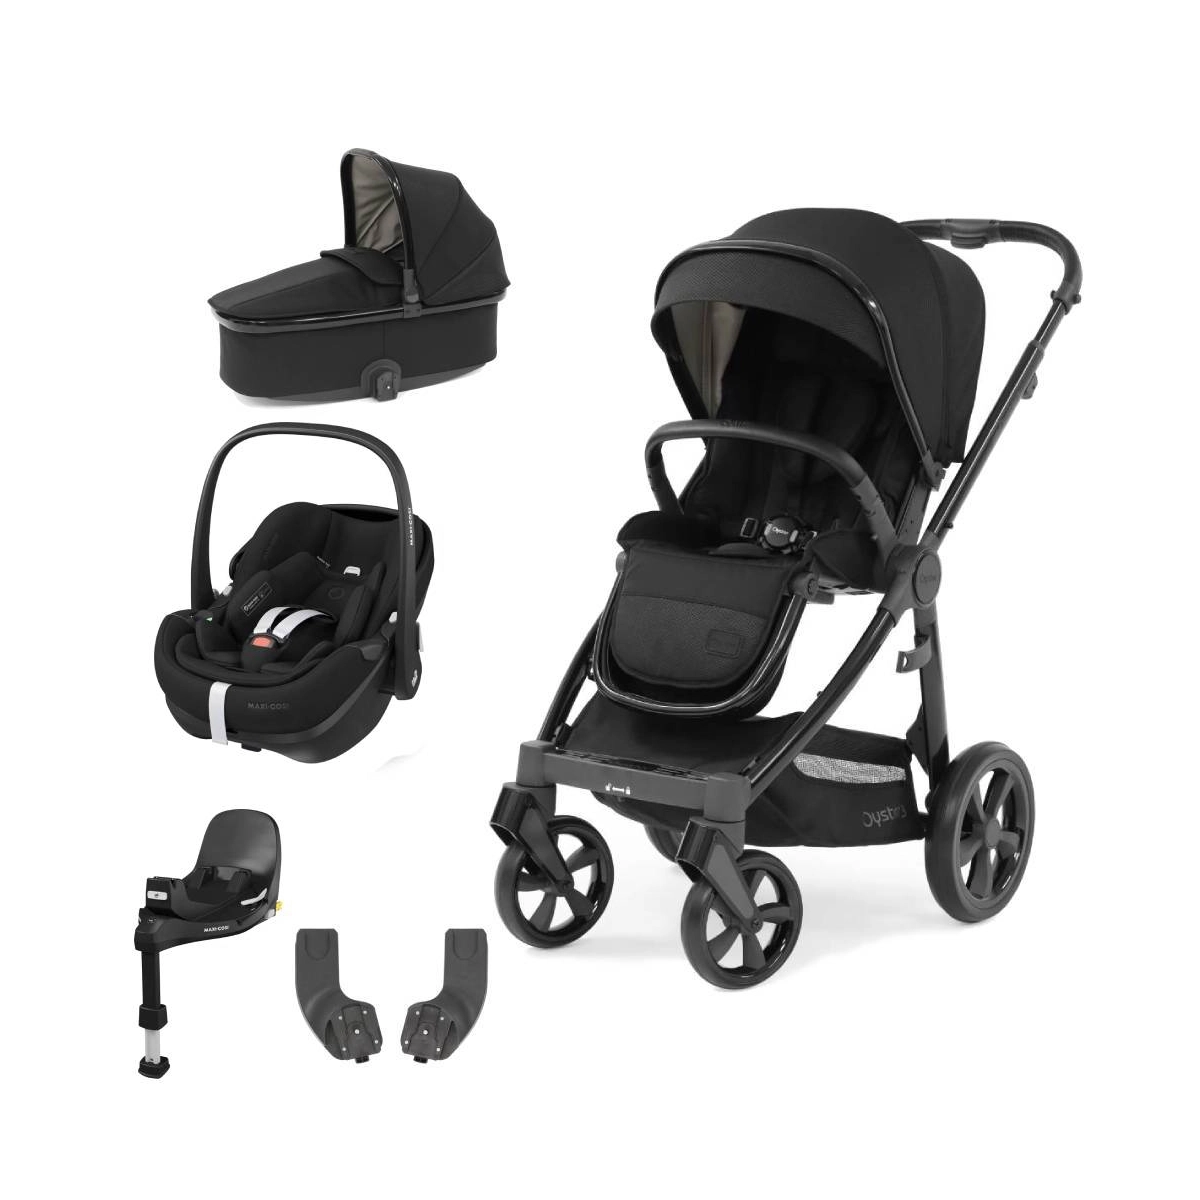 BabyStyle Oyster 3 Gloss Black Chassis Essential 5 Piece Bundle with Maxi Cosi Pebble 360 Pro Car Seat & Base